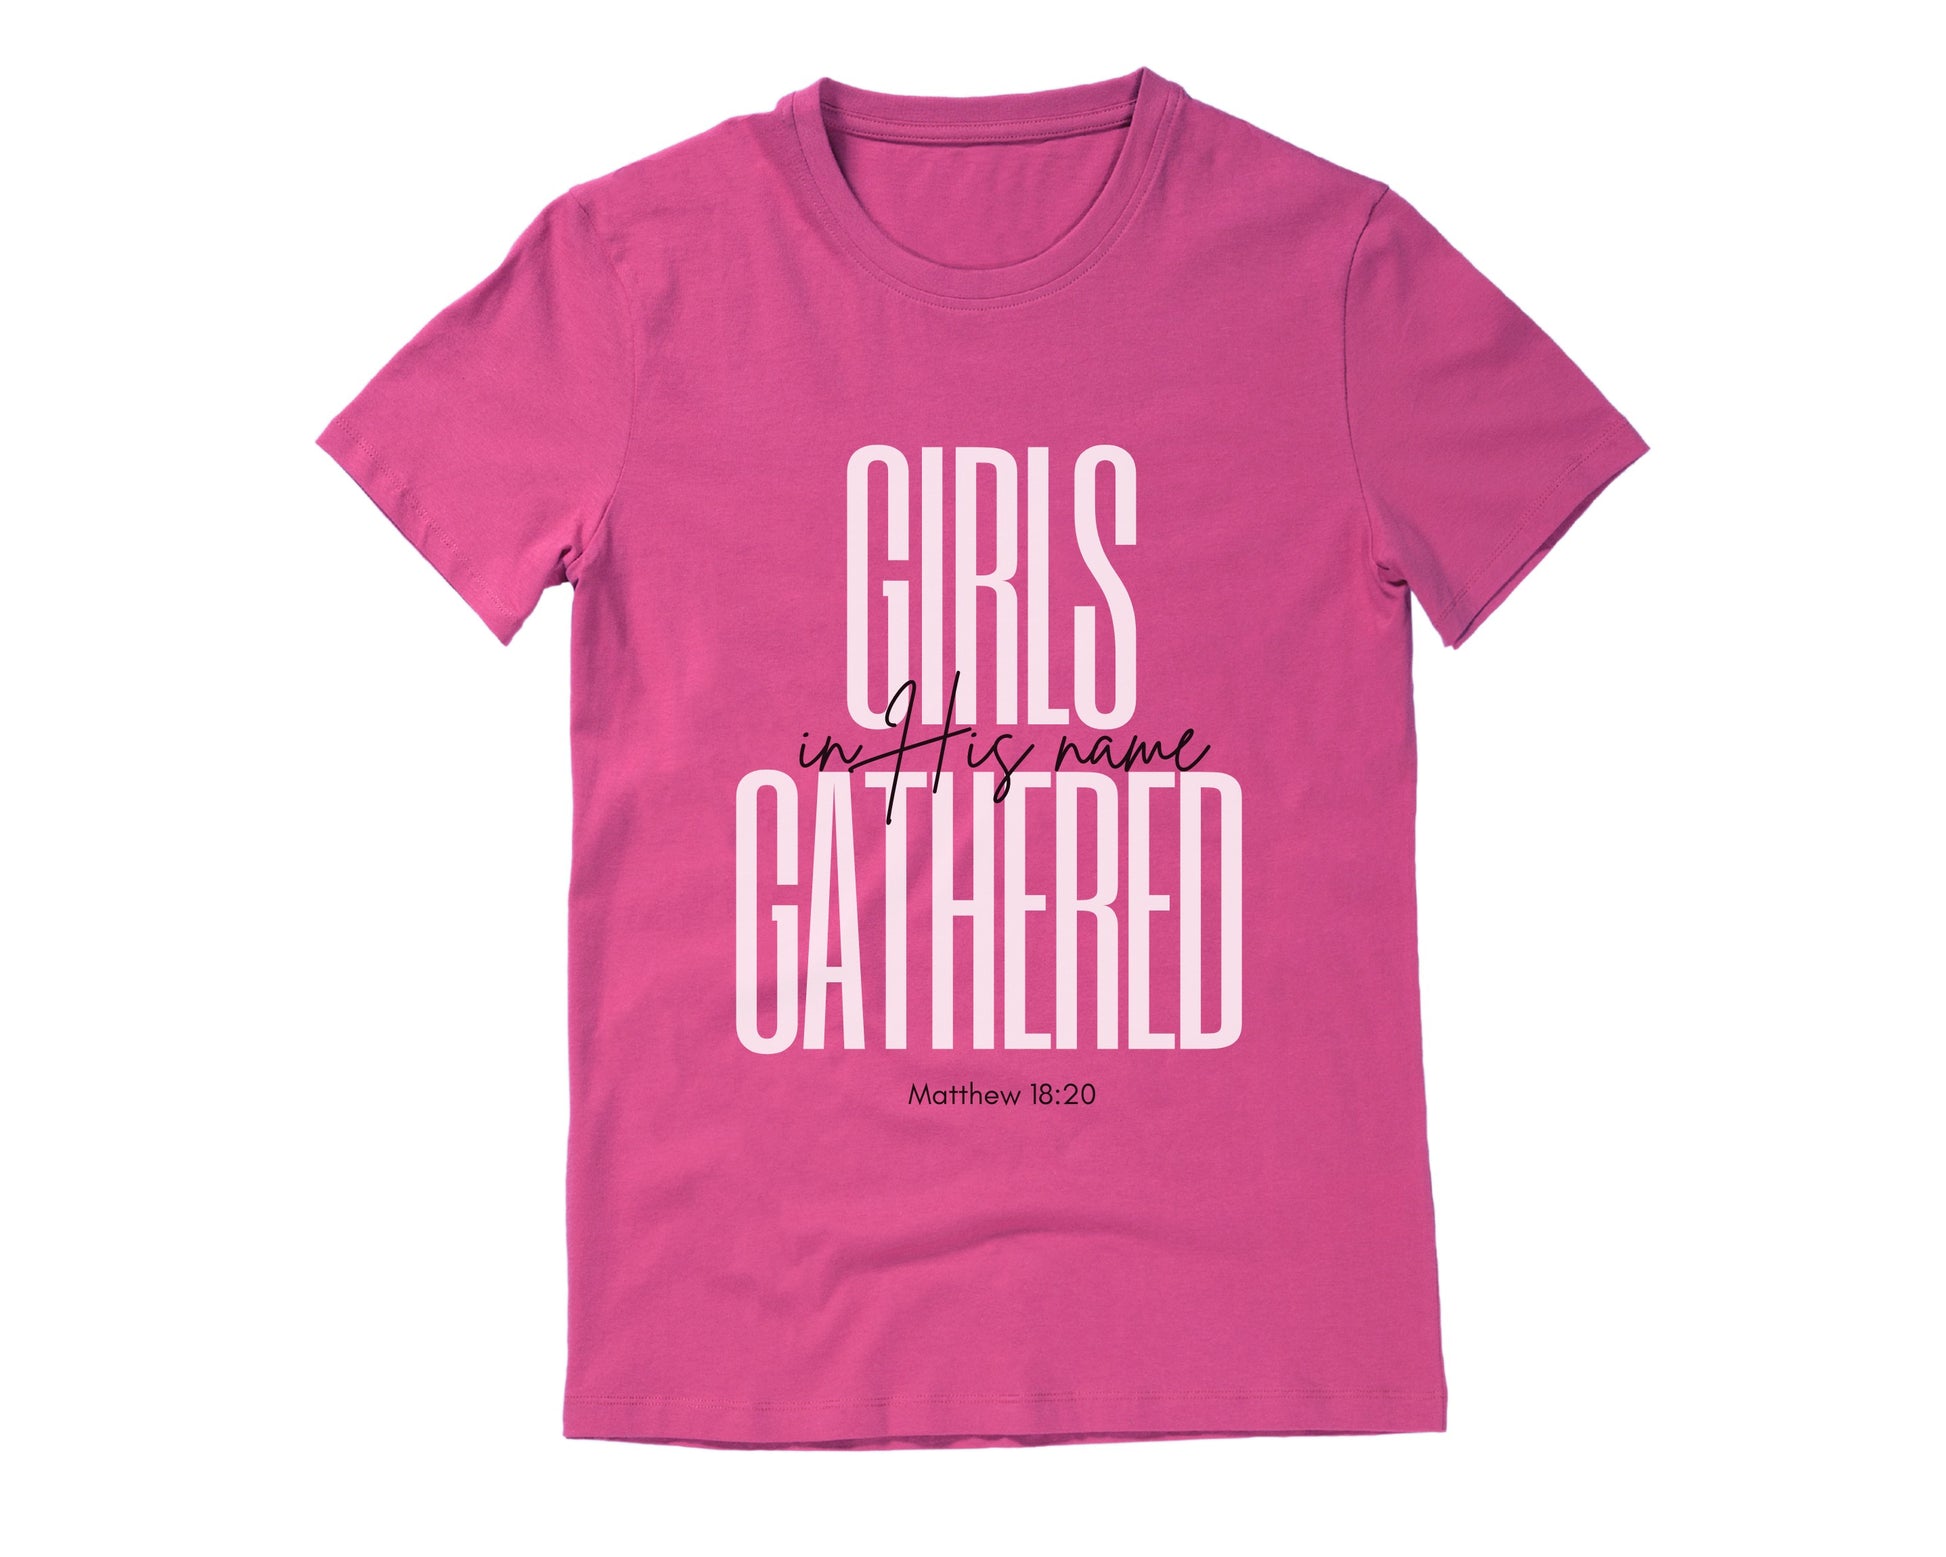 Girls Gathered In His Name T-Shirt for Small Life Groups in Dark Pink